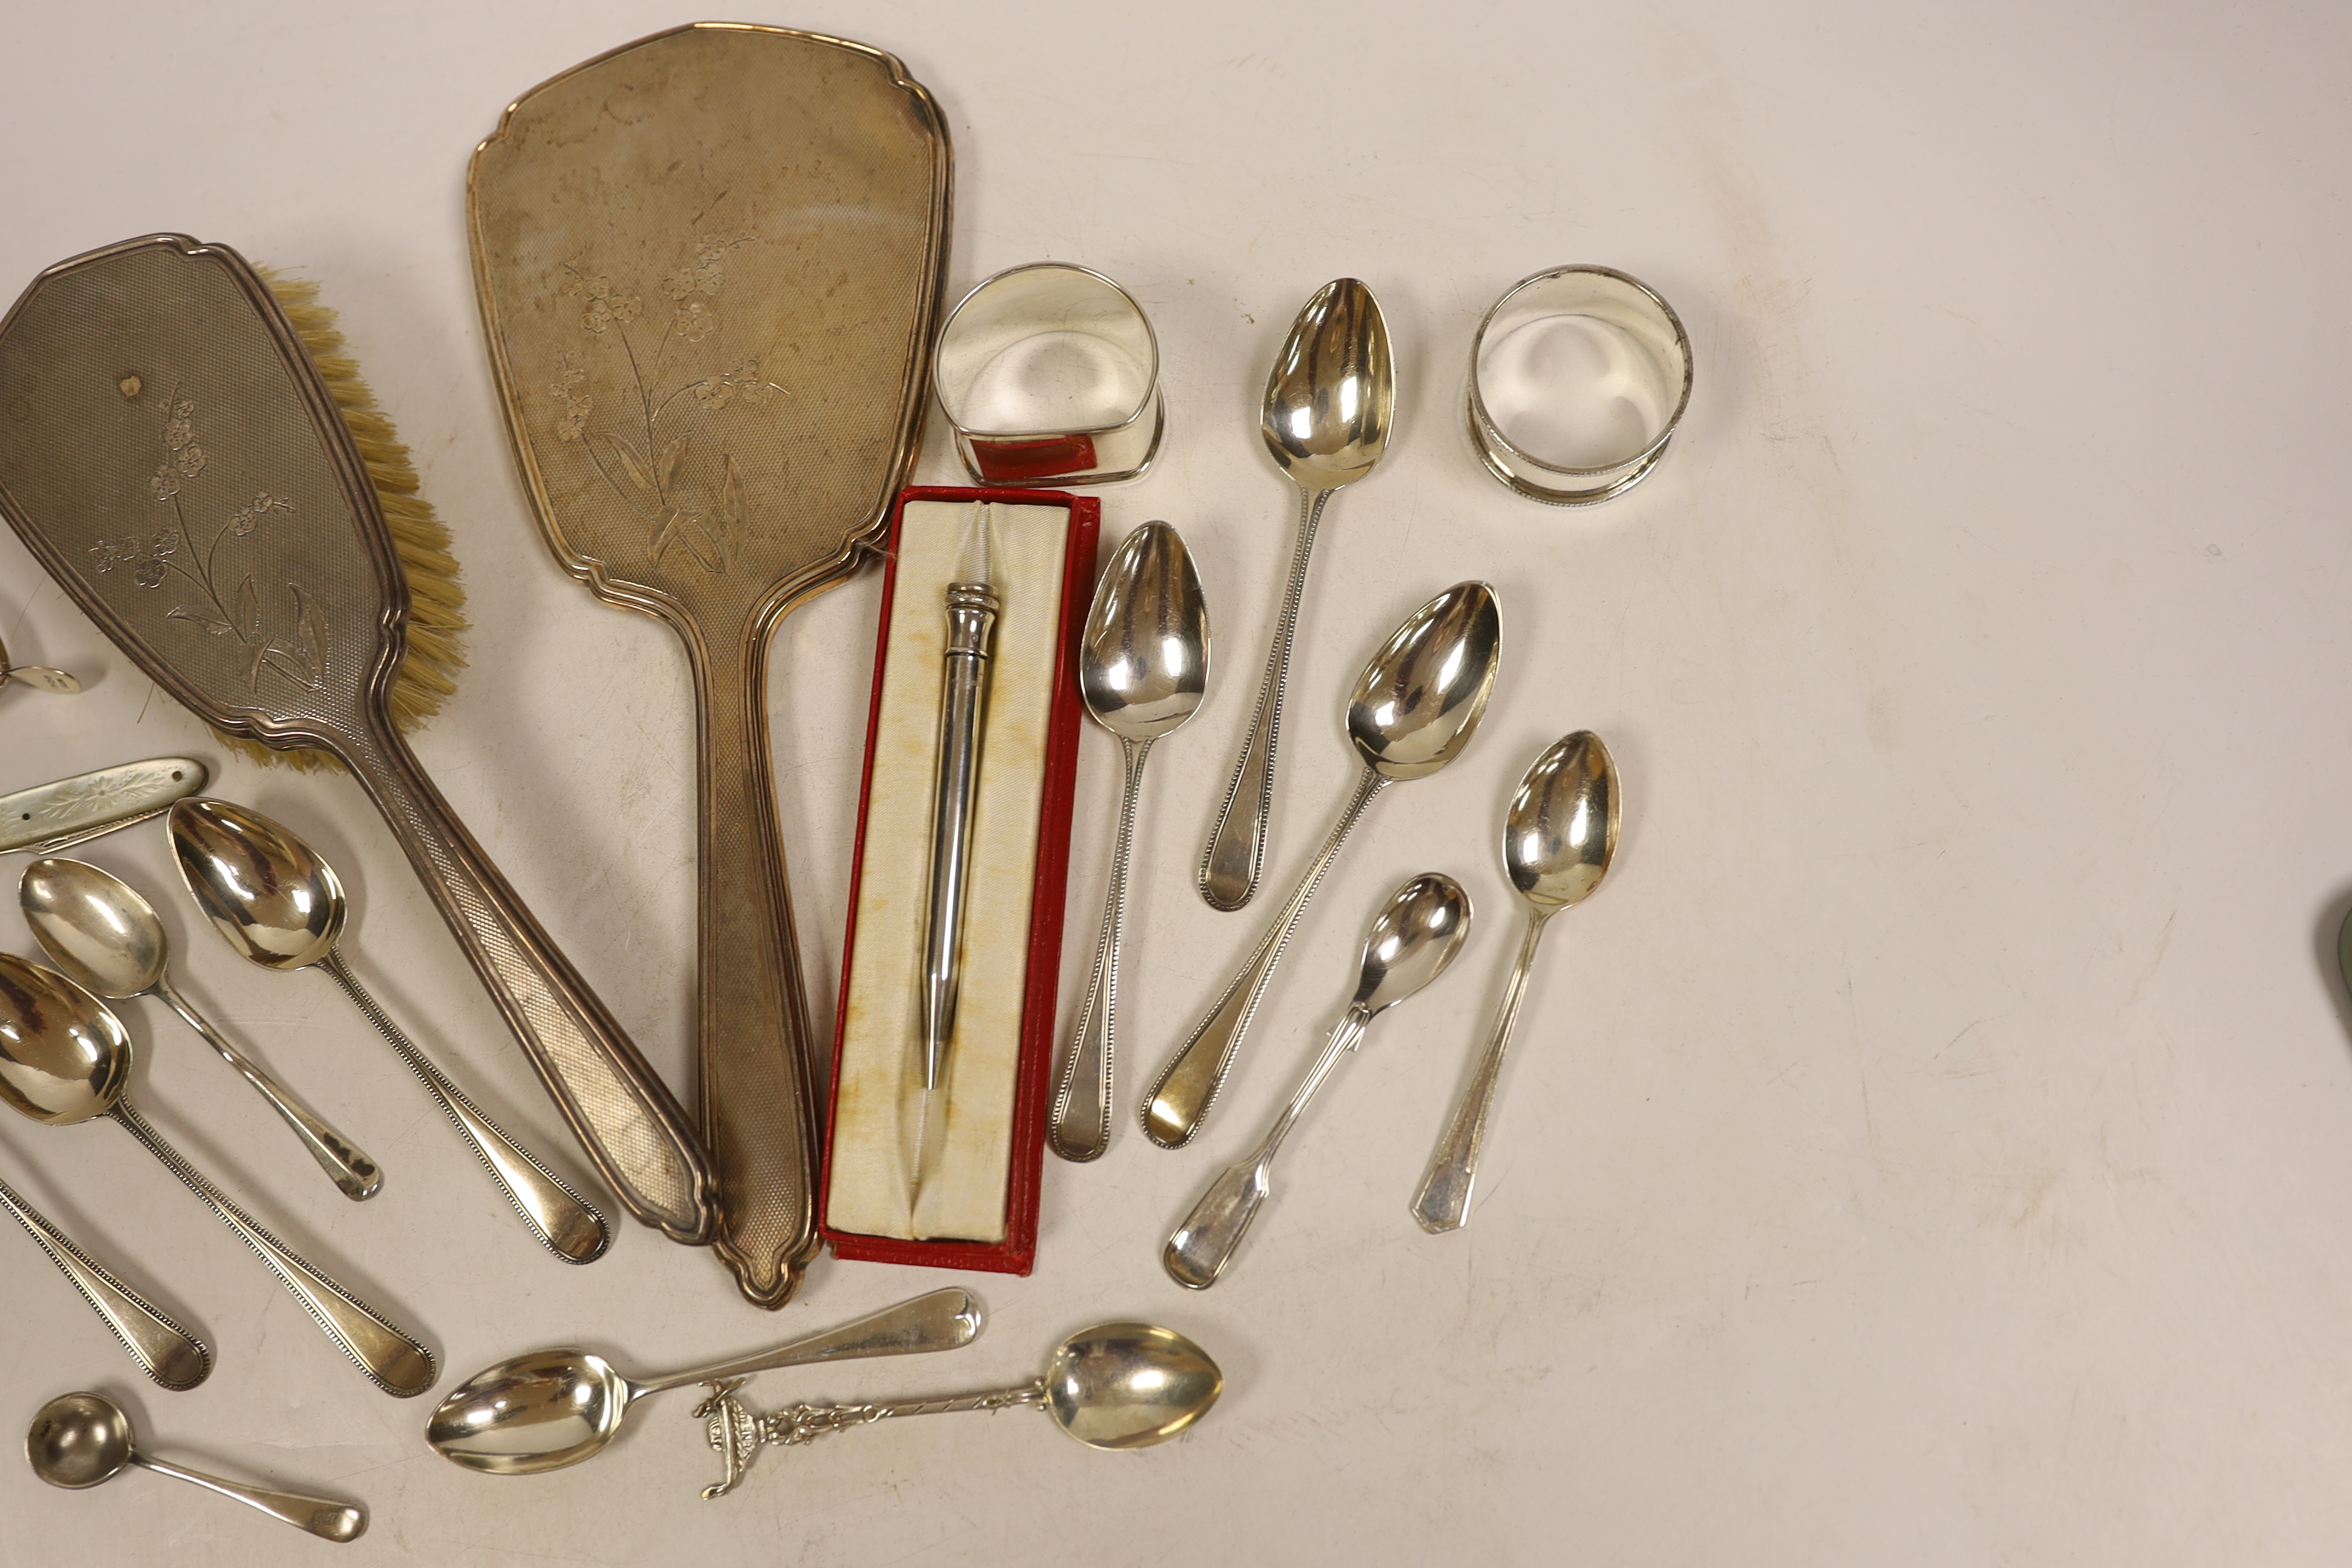 A silver mounted hand mirror and hair brush and sundry small silver including teaspoons, Georgian travelling fork, wishbone sugar nips, napkin rings and pencil.